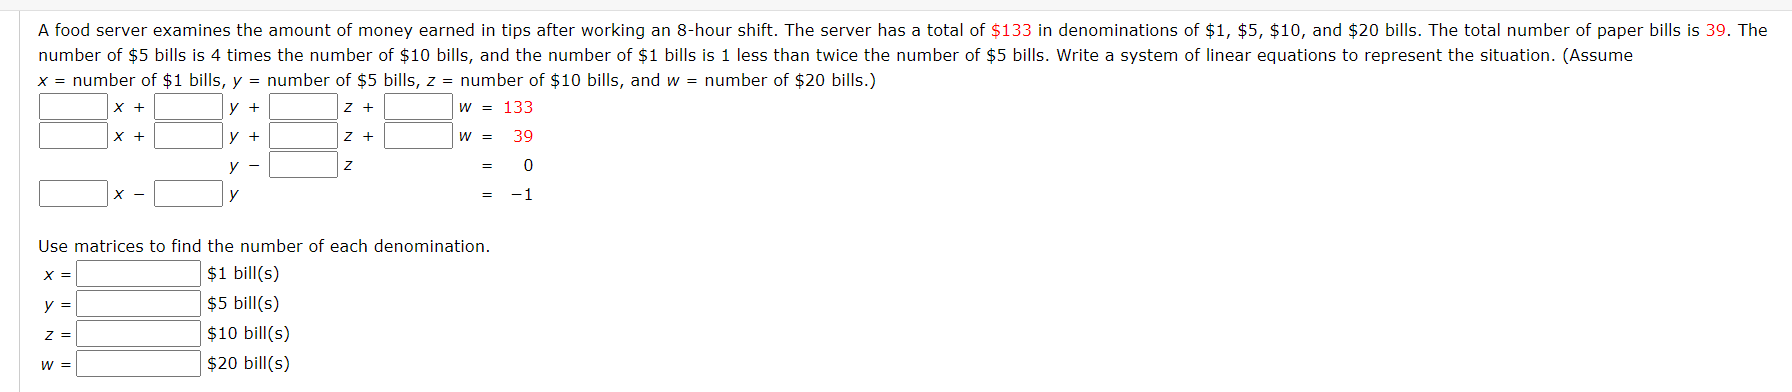 A food server examines the amount of money earned in tips after working an 8-hour shift. The server has a total of $133 in denominations of $1, $5, $10, and $20 bills. The total number of paper bills is 39. The
number of $5 bills is 4 times the number of $10 bills, and the number of $1 bills is 1 less than twice the number of $5 bills. Write a system of linear equations to represent the situation. (Assume
x = number of $1 bills, y = number of $5 bills, z = number of $10 bills, and w = number of $20 bills.)
X +
y +
z +
W = 133
X +
y +
z +
W =
39
у —
X -
y
-1
Use matrices to find the number of each denomination.
$1 bill(s)
$5 bill(s)
X =
y =
z =
$10 bill(s)
w =
$20 bill(s)
